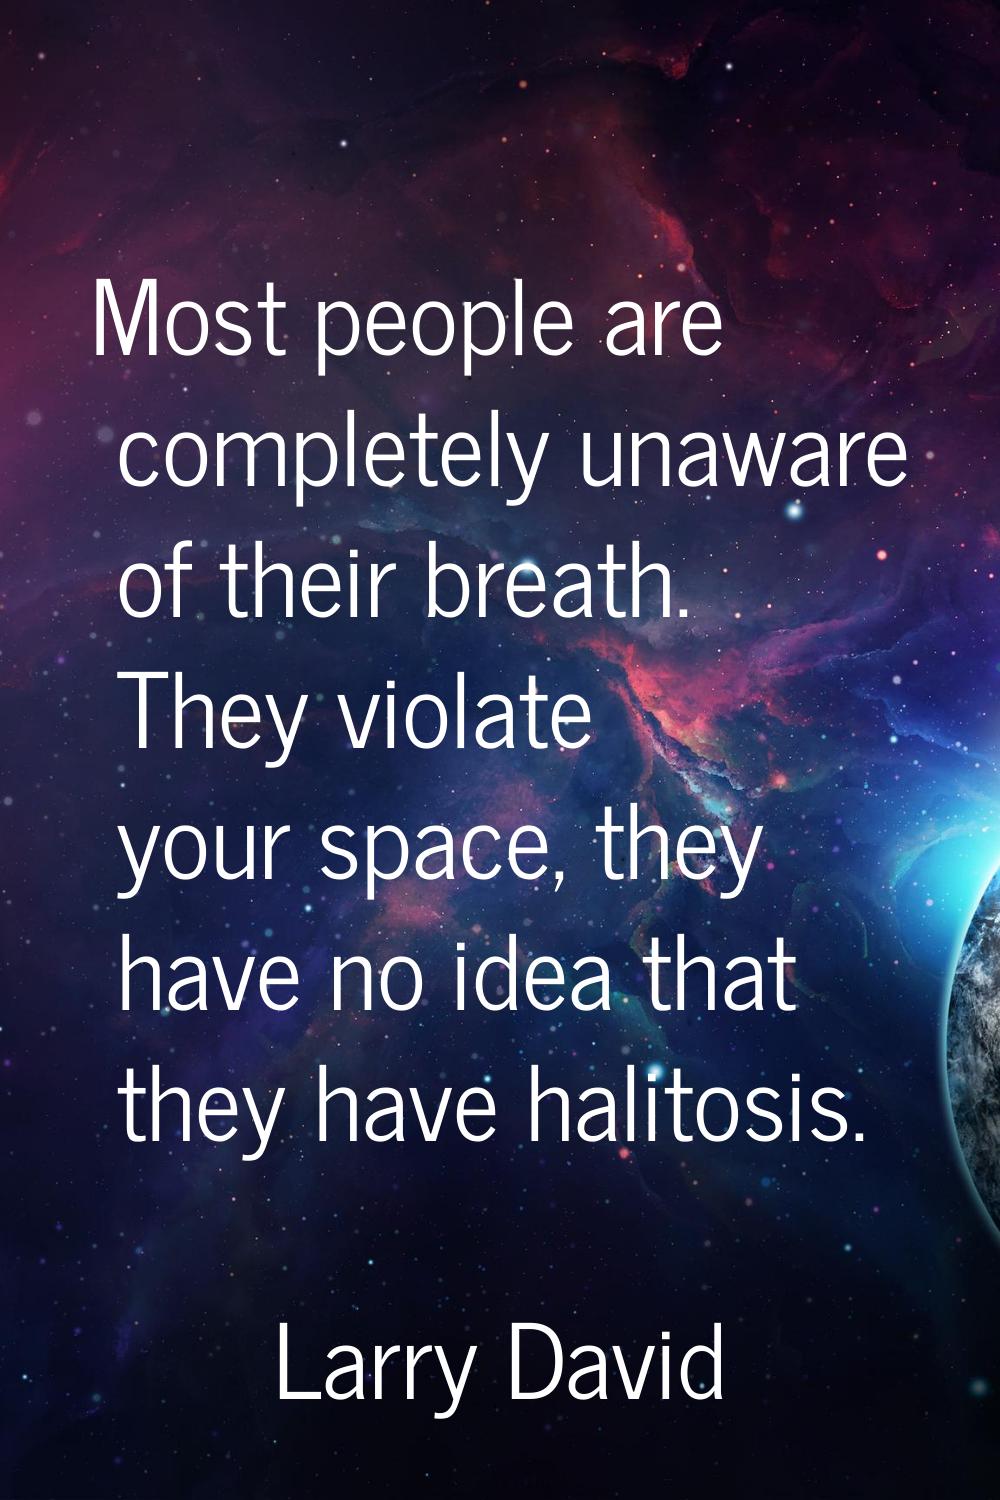 Most people are completely unaware of their breath. They violate your space, they have no idea that